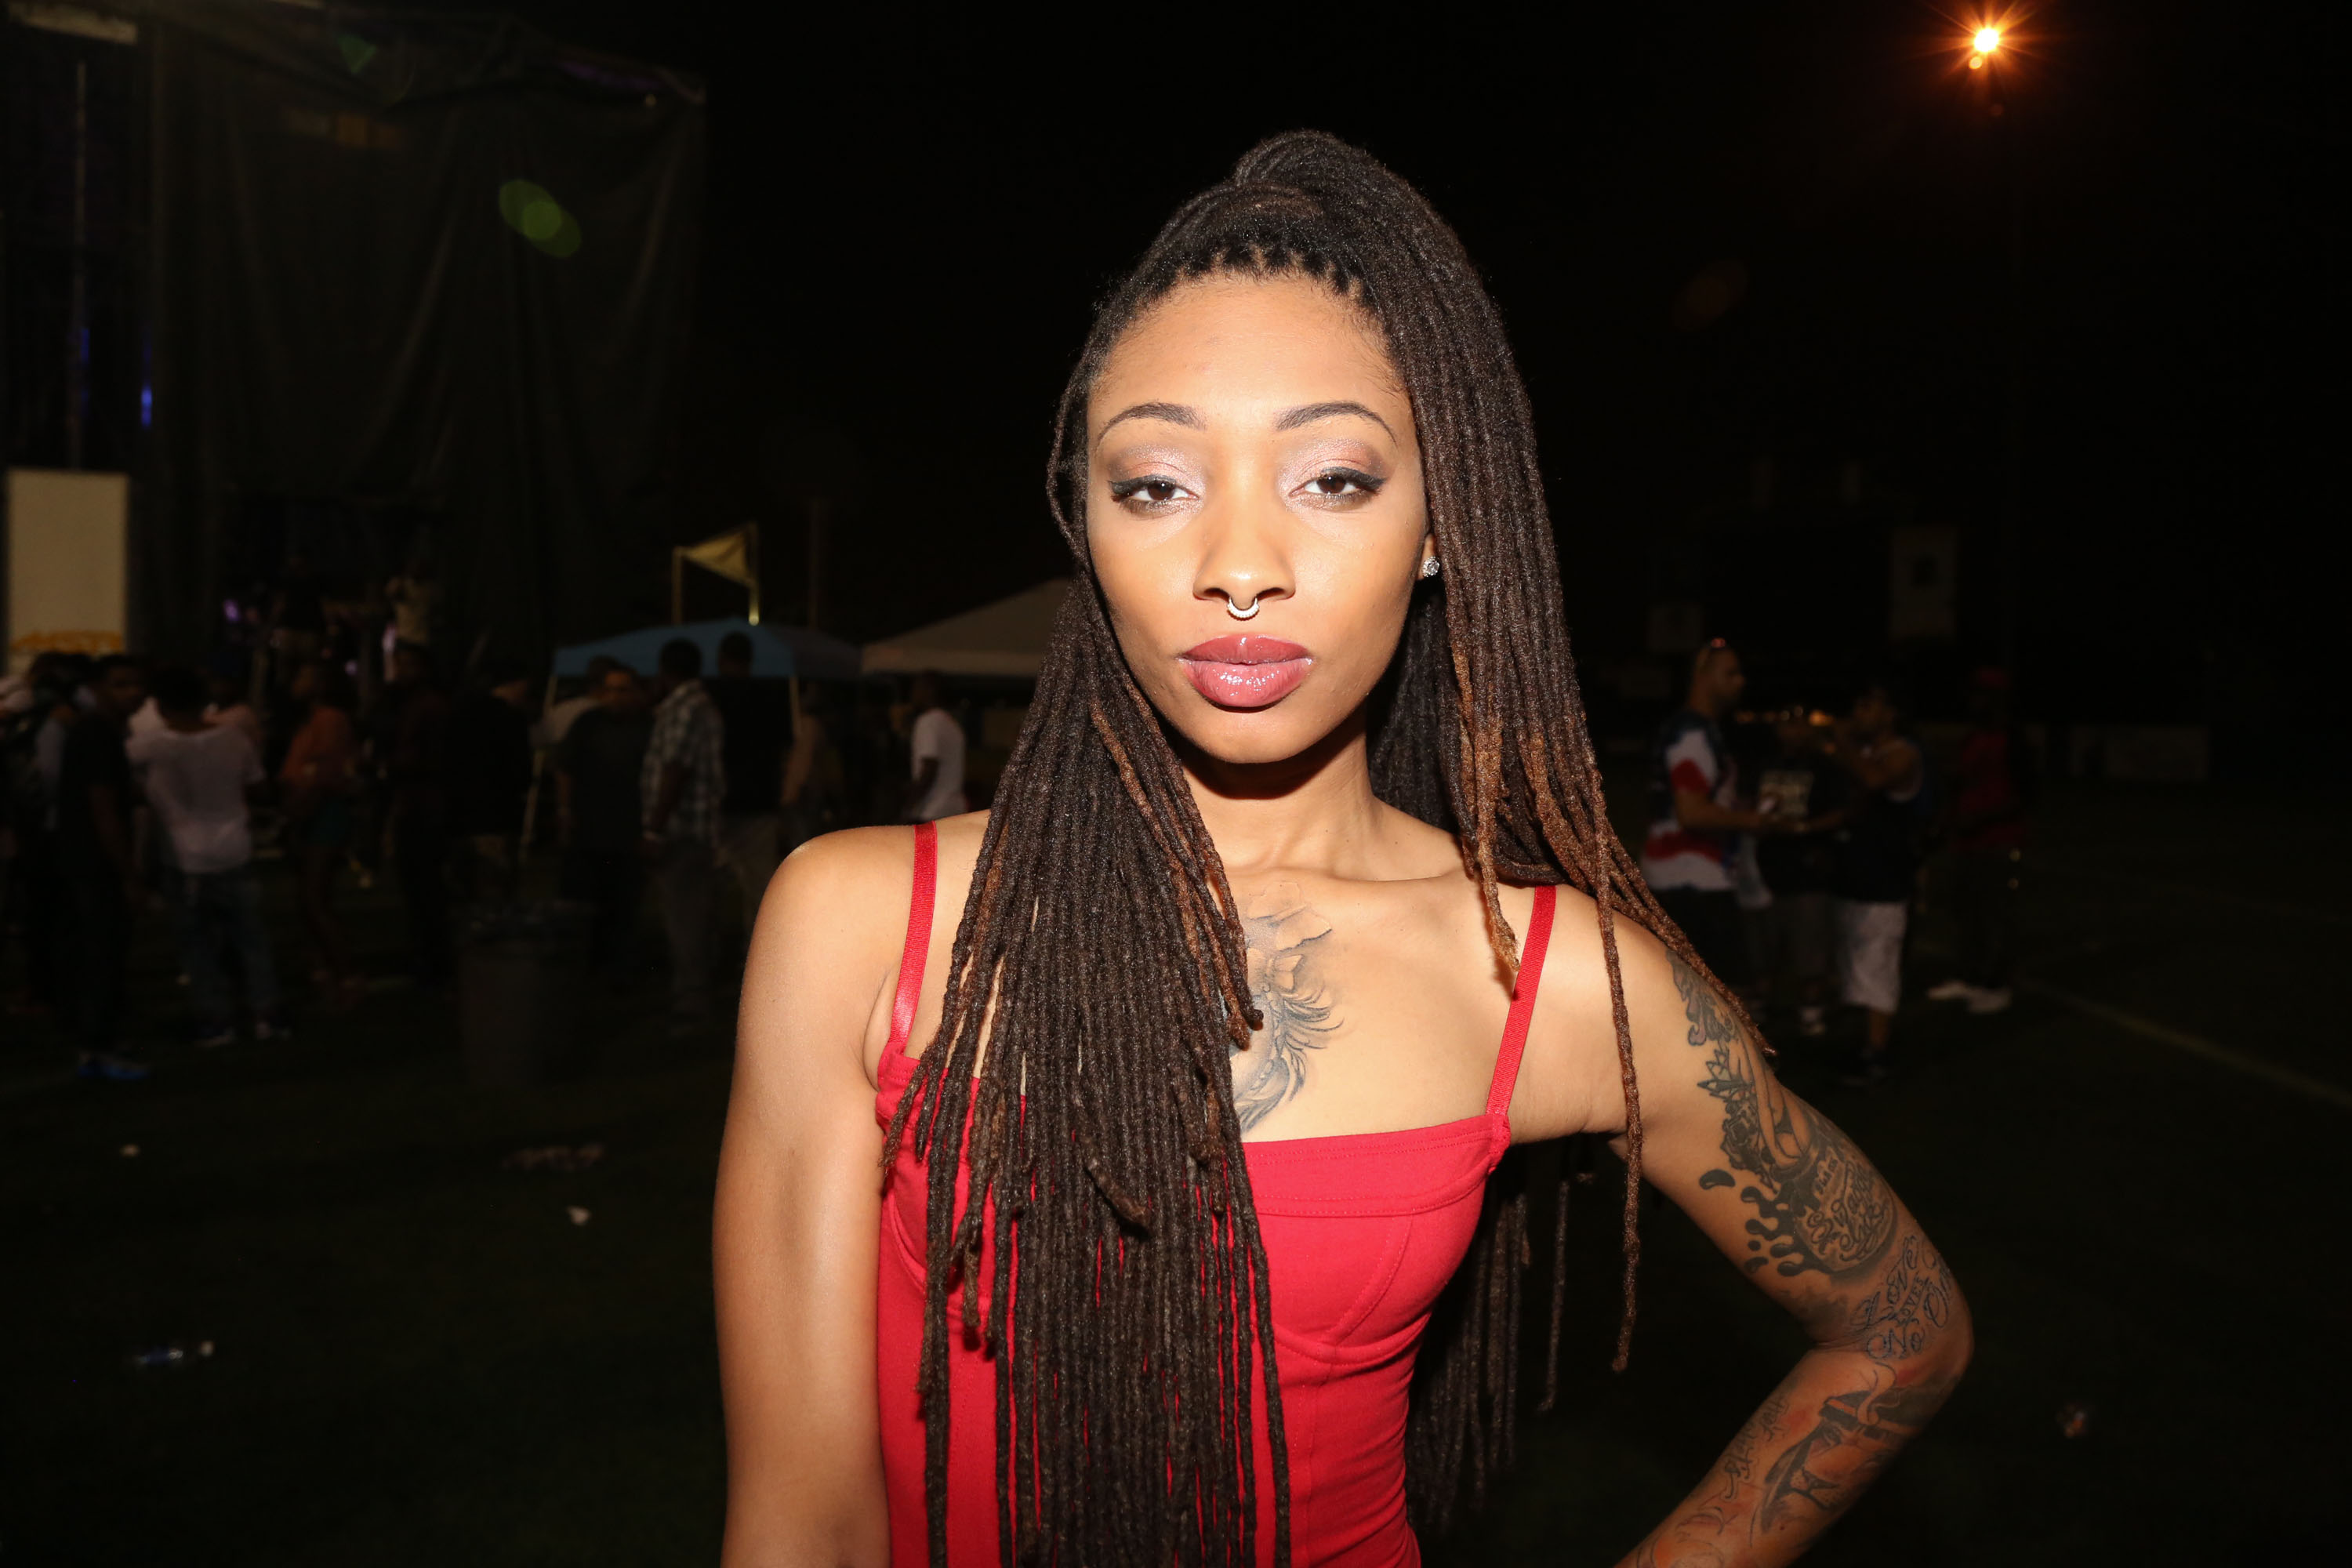 Get it, girl!Do you think we’ll see Dutchess on Black Ink Crew ag...